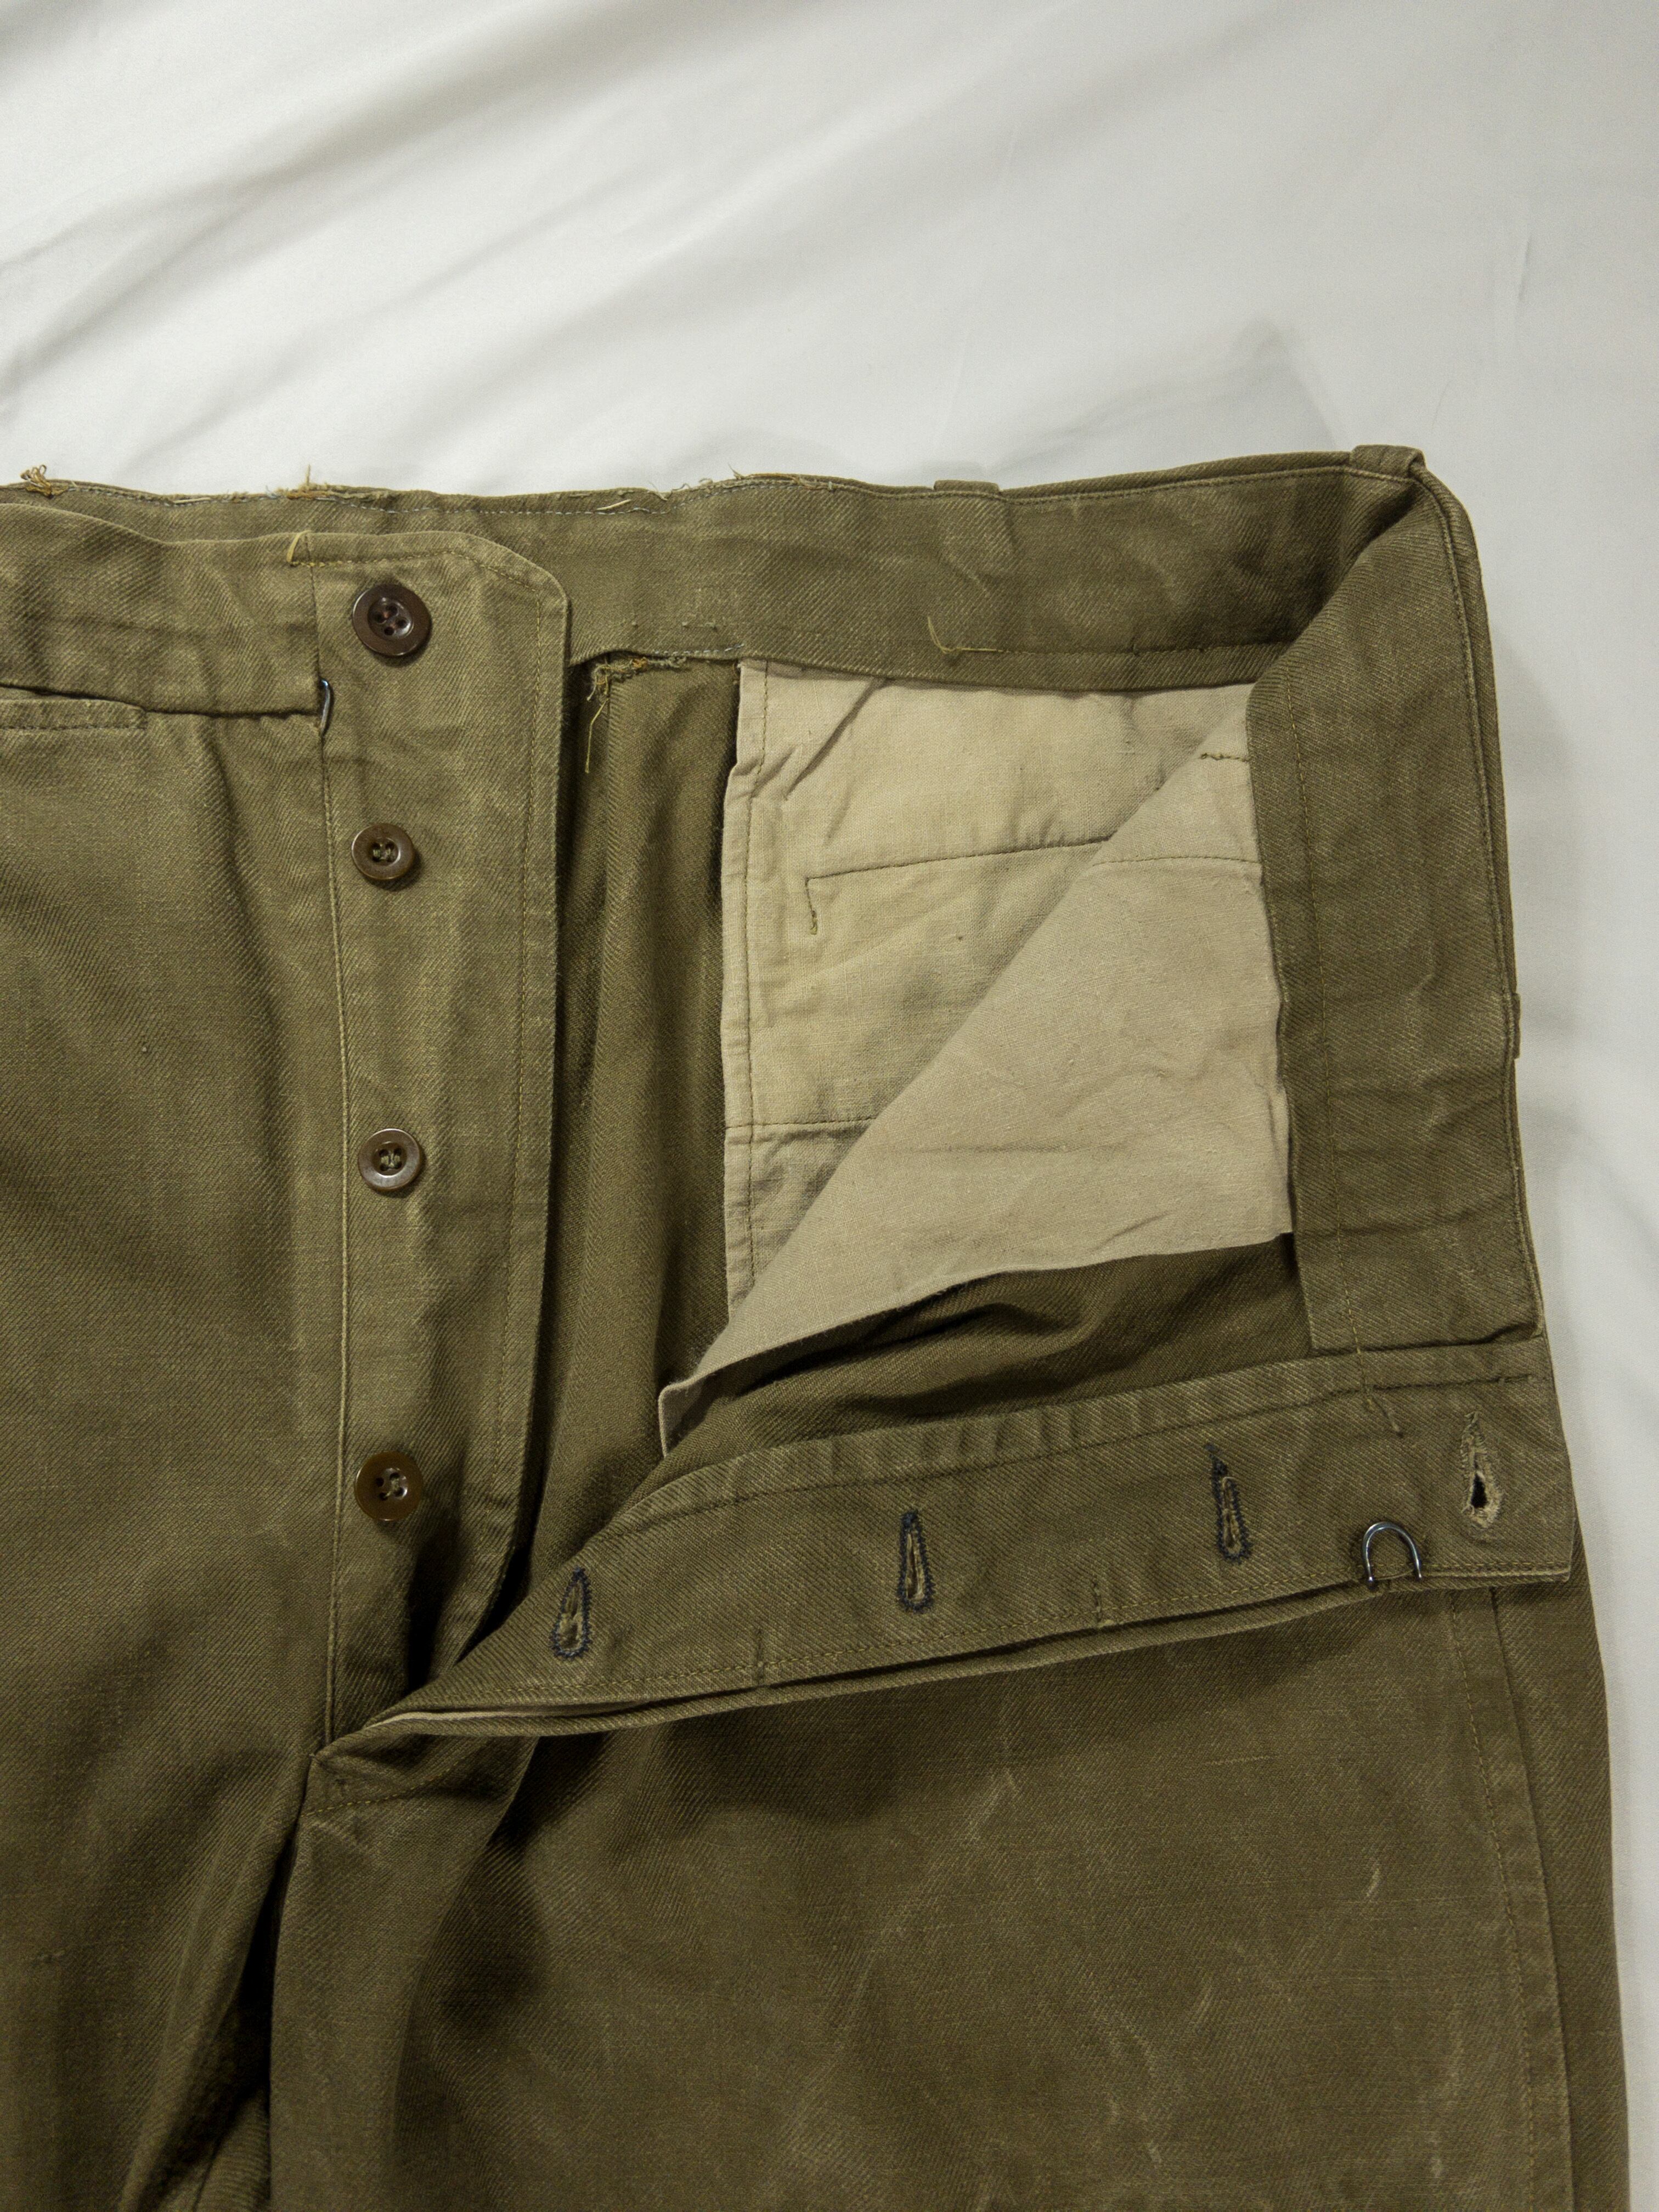 s, Rare"French Army", M Cotton Chino Trousers based on